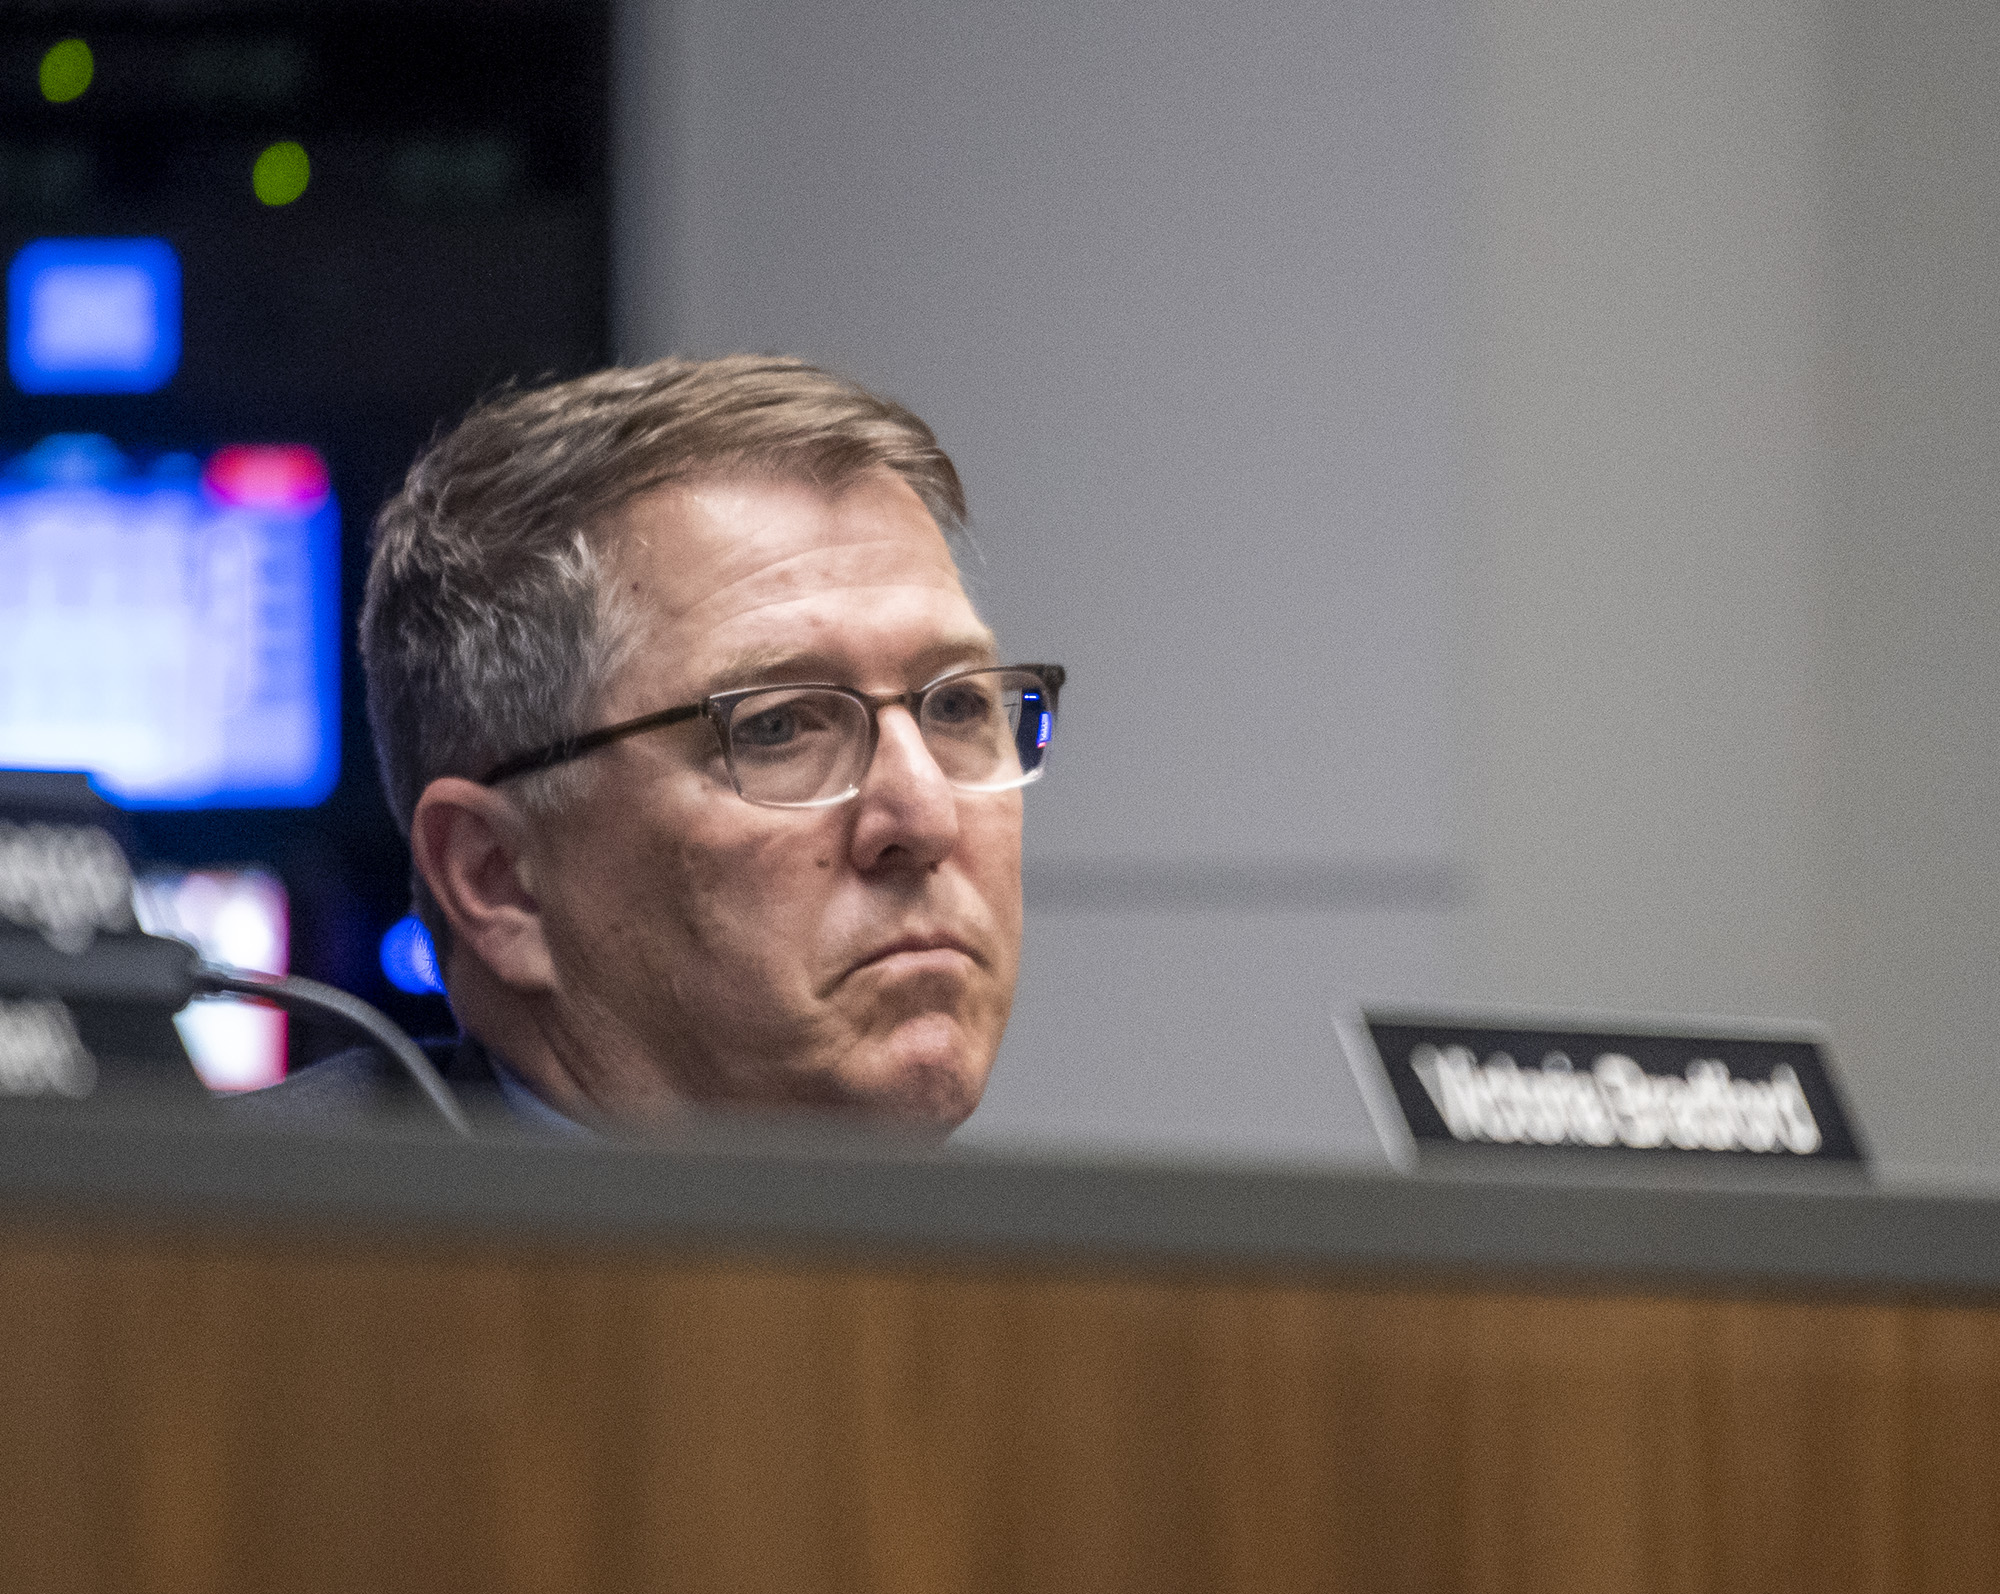 Evergreen Public Schools superintendent John Boyd is at the center of controversy about the district's communication with parents in the wake of a shooting connected to Evergreen High School last week.